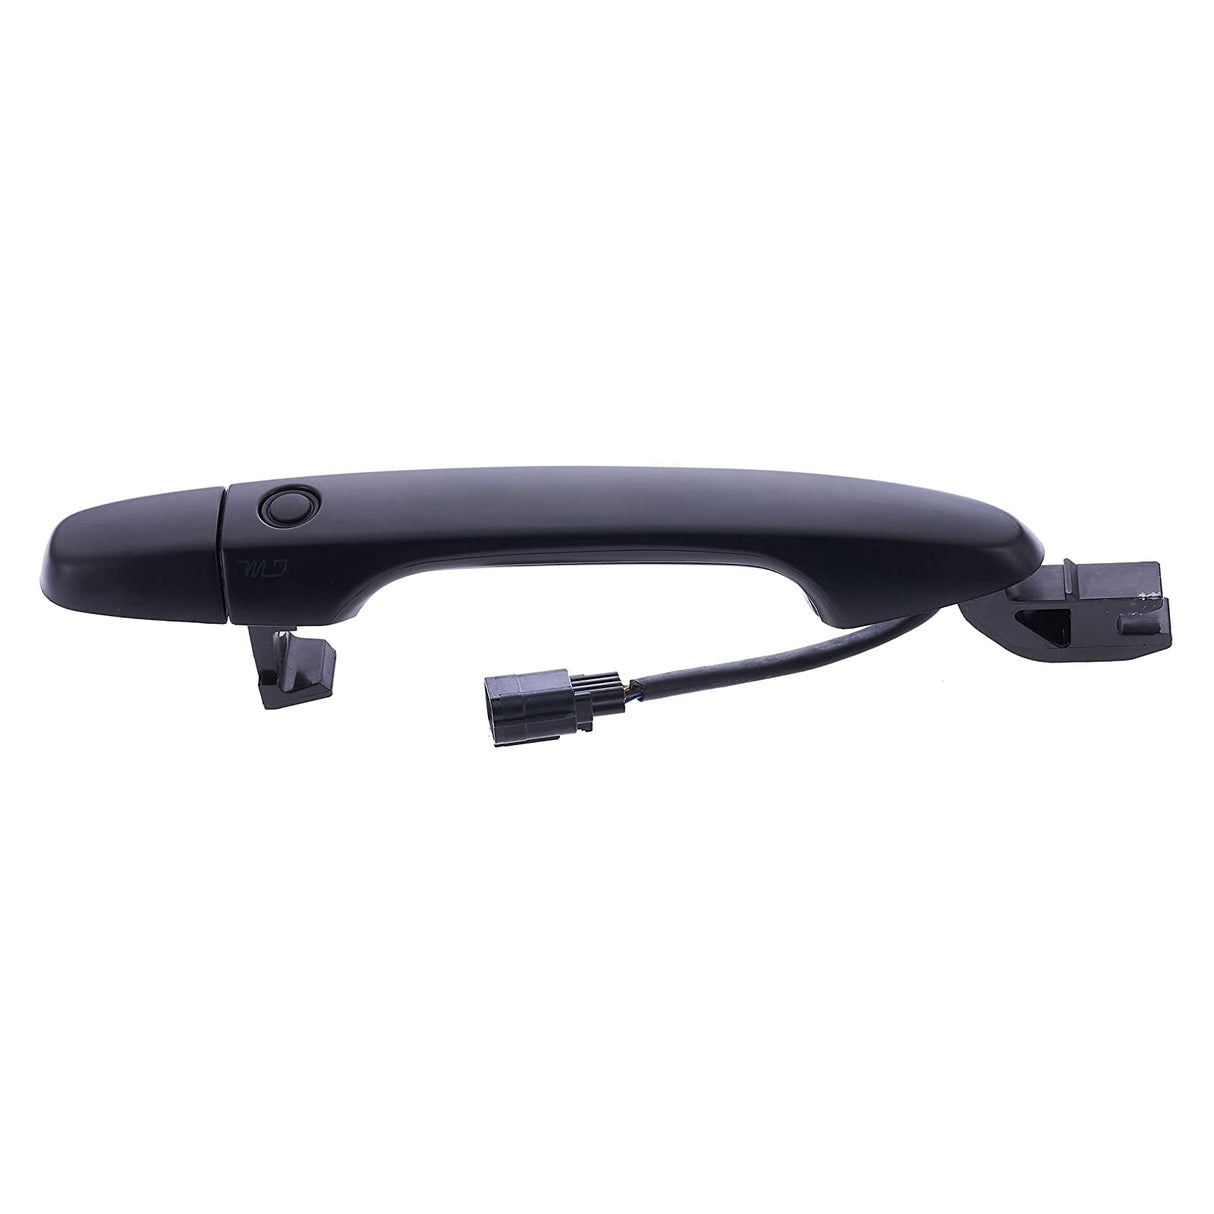 Honda Civic + Hybrid (2012-2015), CR-V (2015-2016) Black Replacement Exterior Door Handle Front Right Side w/o Keyhole